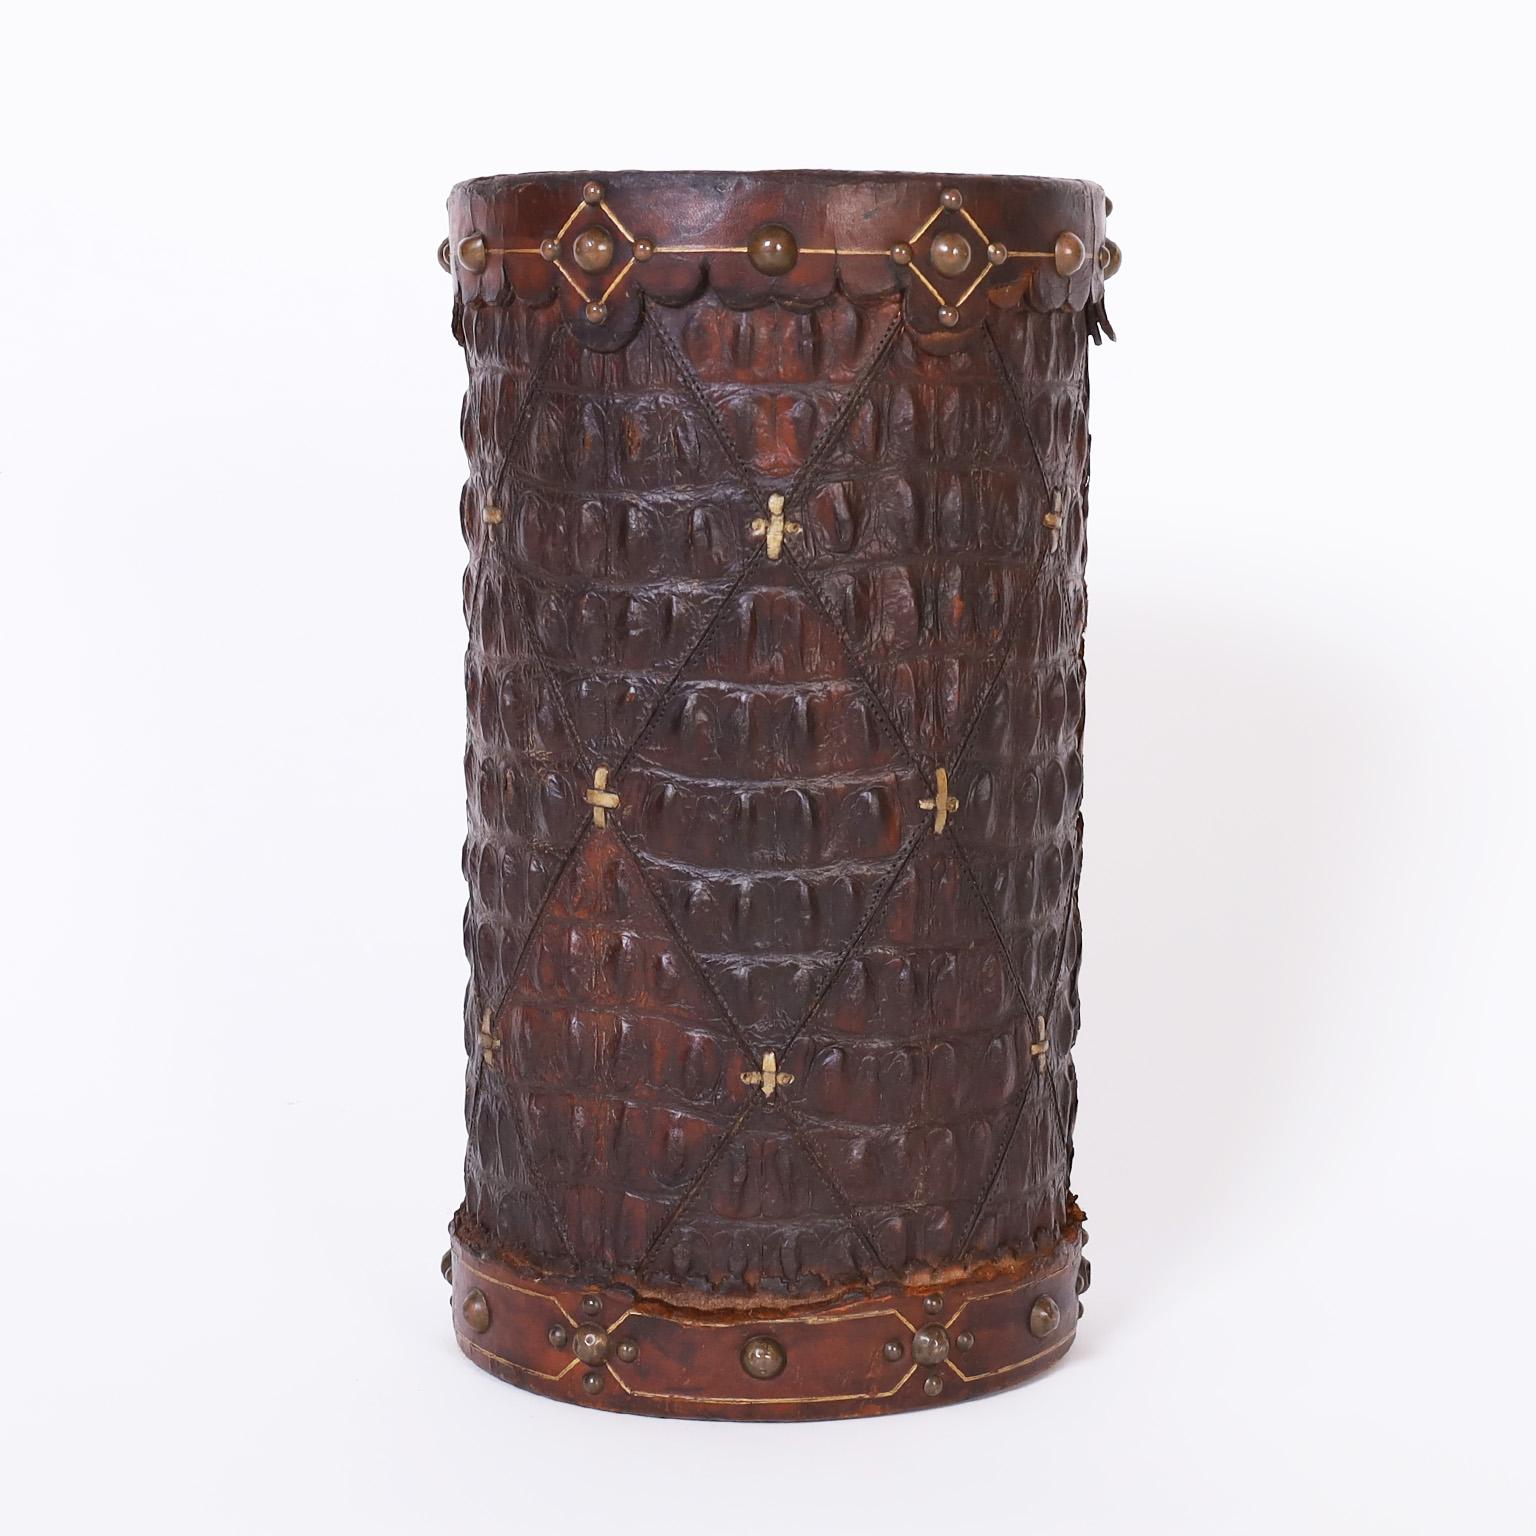 For the person who has everything, an antique trash bin clad in alligator stitched in a diamond pattern with a tooled leather top and bottom cuff decorated with brass tacks.